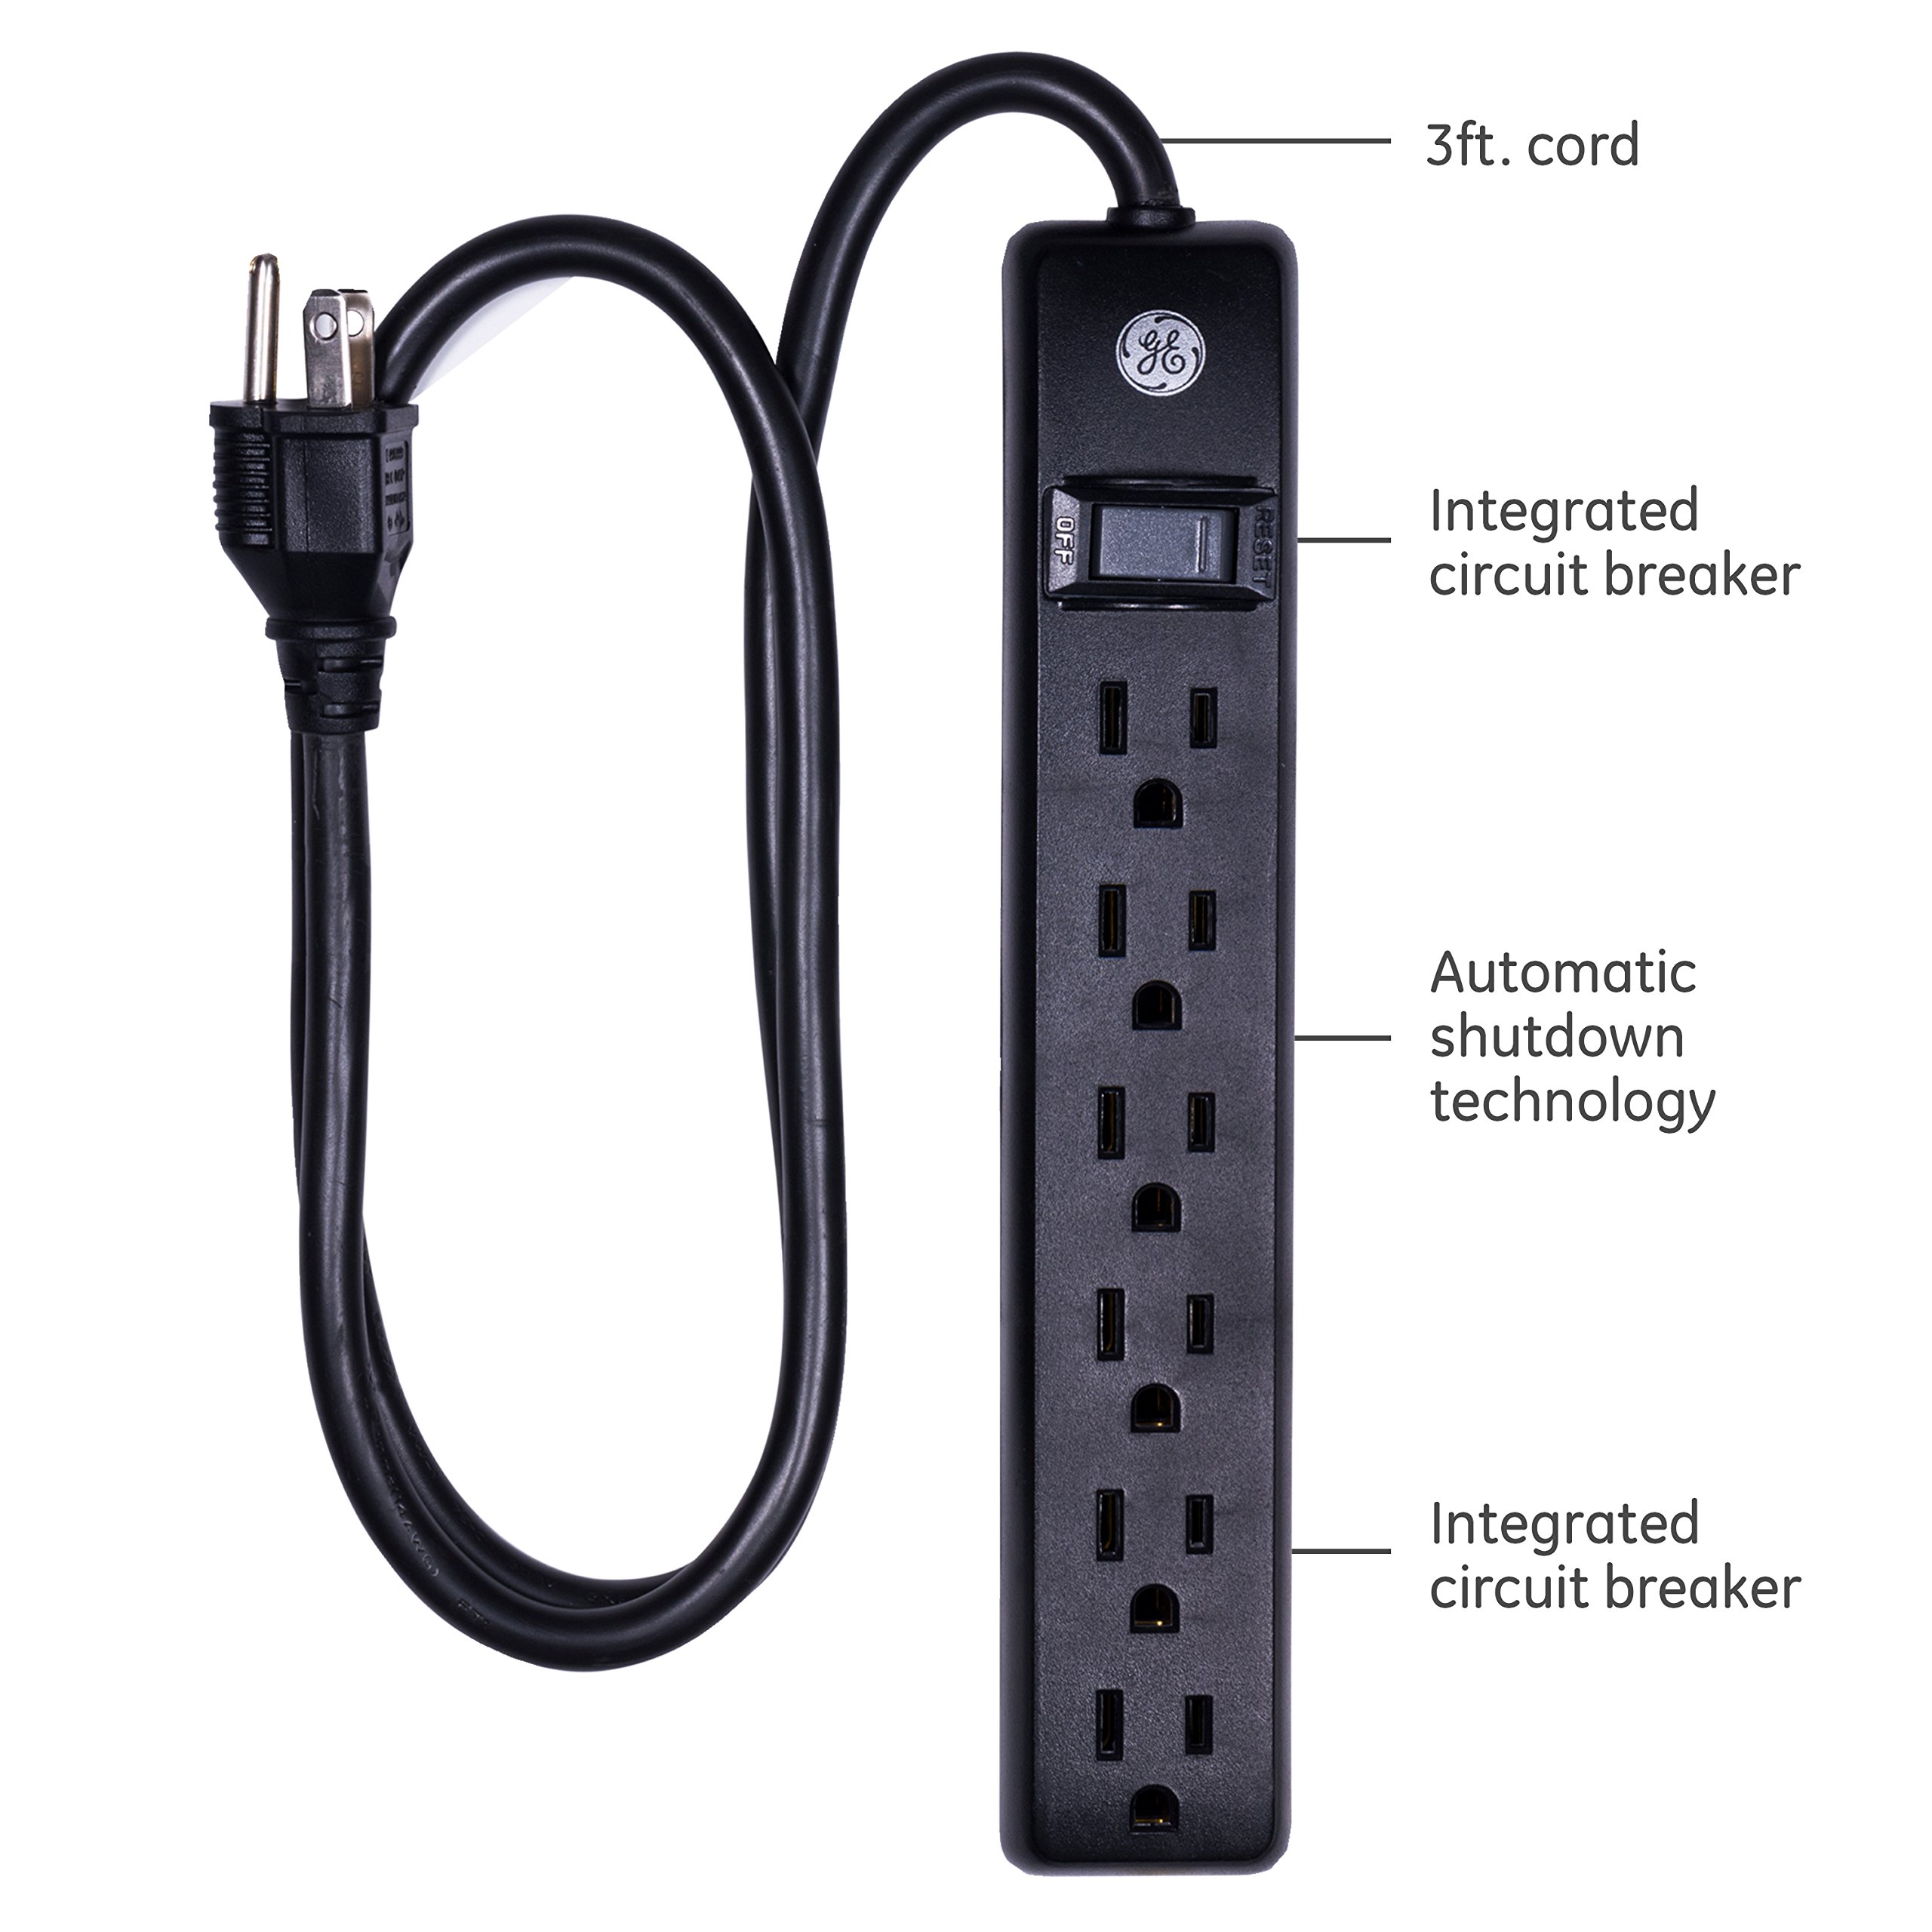 GE 6 Grounded Outlet Surge Protector, 450 Joules, 2 Pack Power Strip, 3 Ft Long Extension Cord & 6 Outlet Power Strip, 6 Ft Cord, Wall Mount, Integrated Circuit Breaker, 120VAC, 15A, 1800W, Black